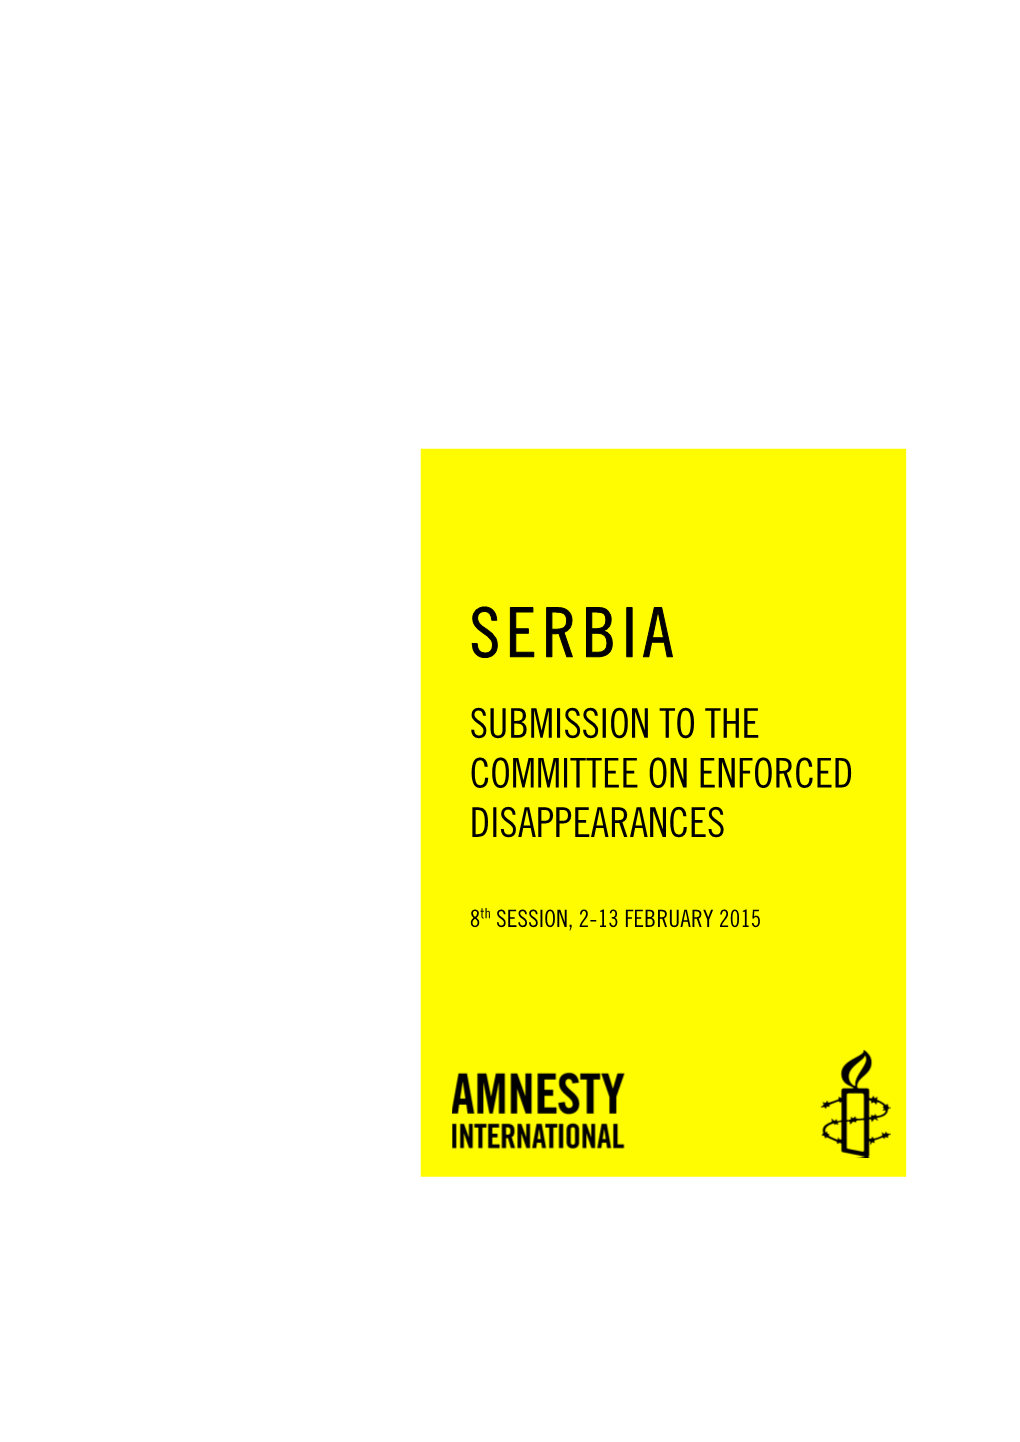 Serbia Submission to the Committee on Enforced Disappearances